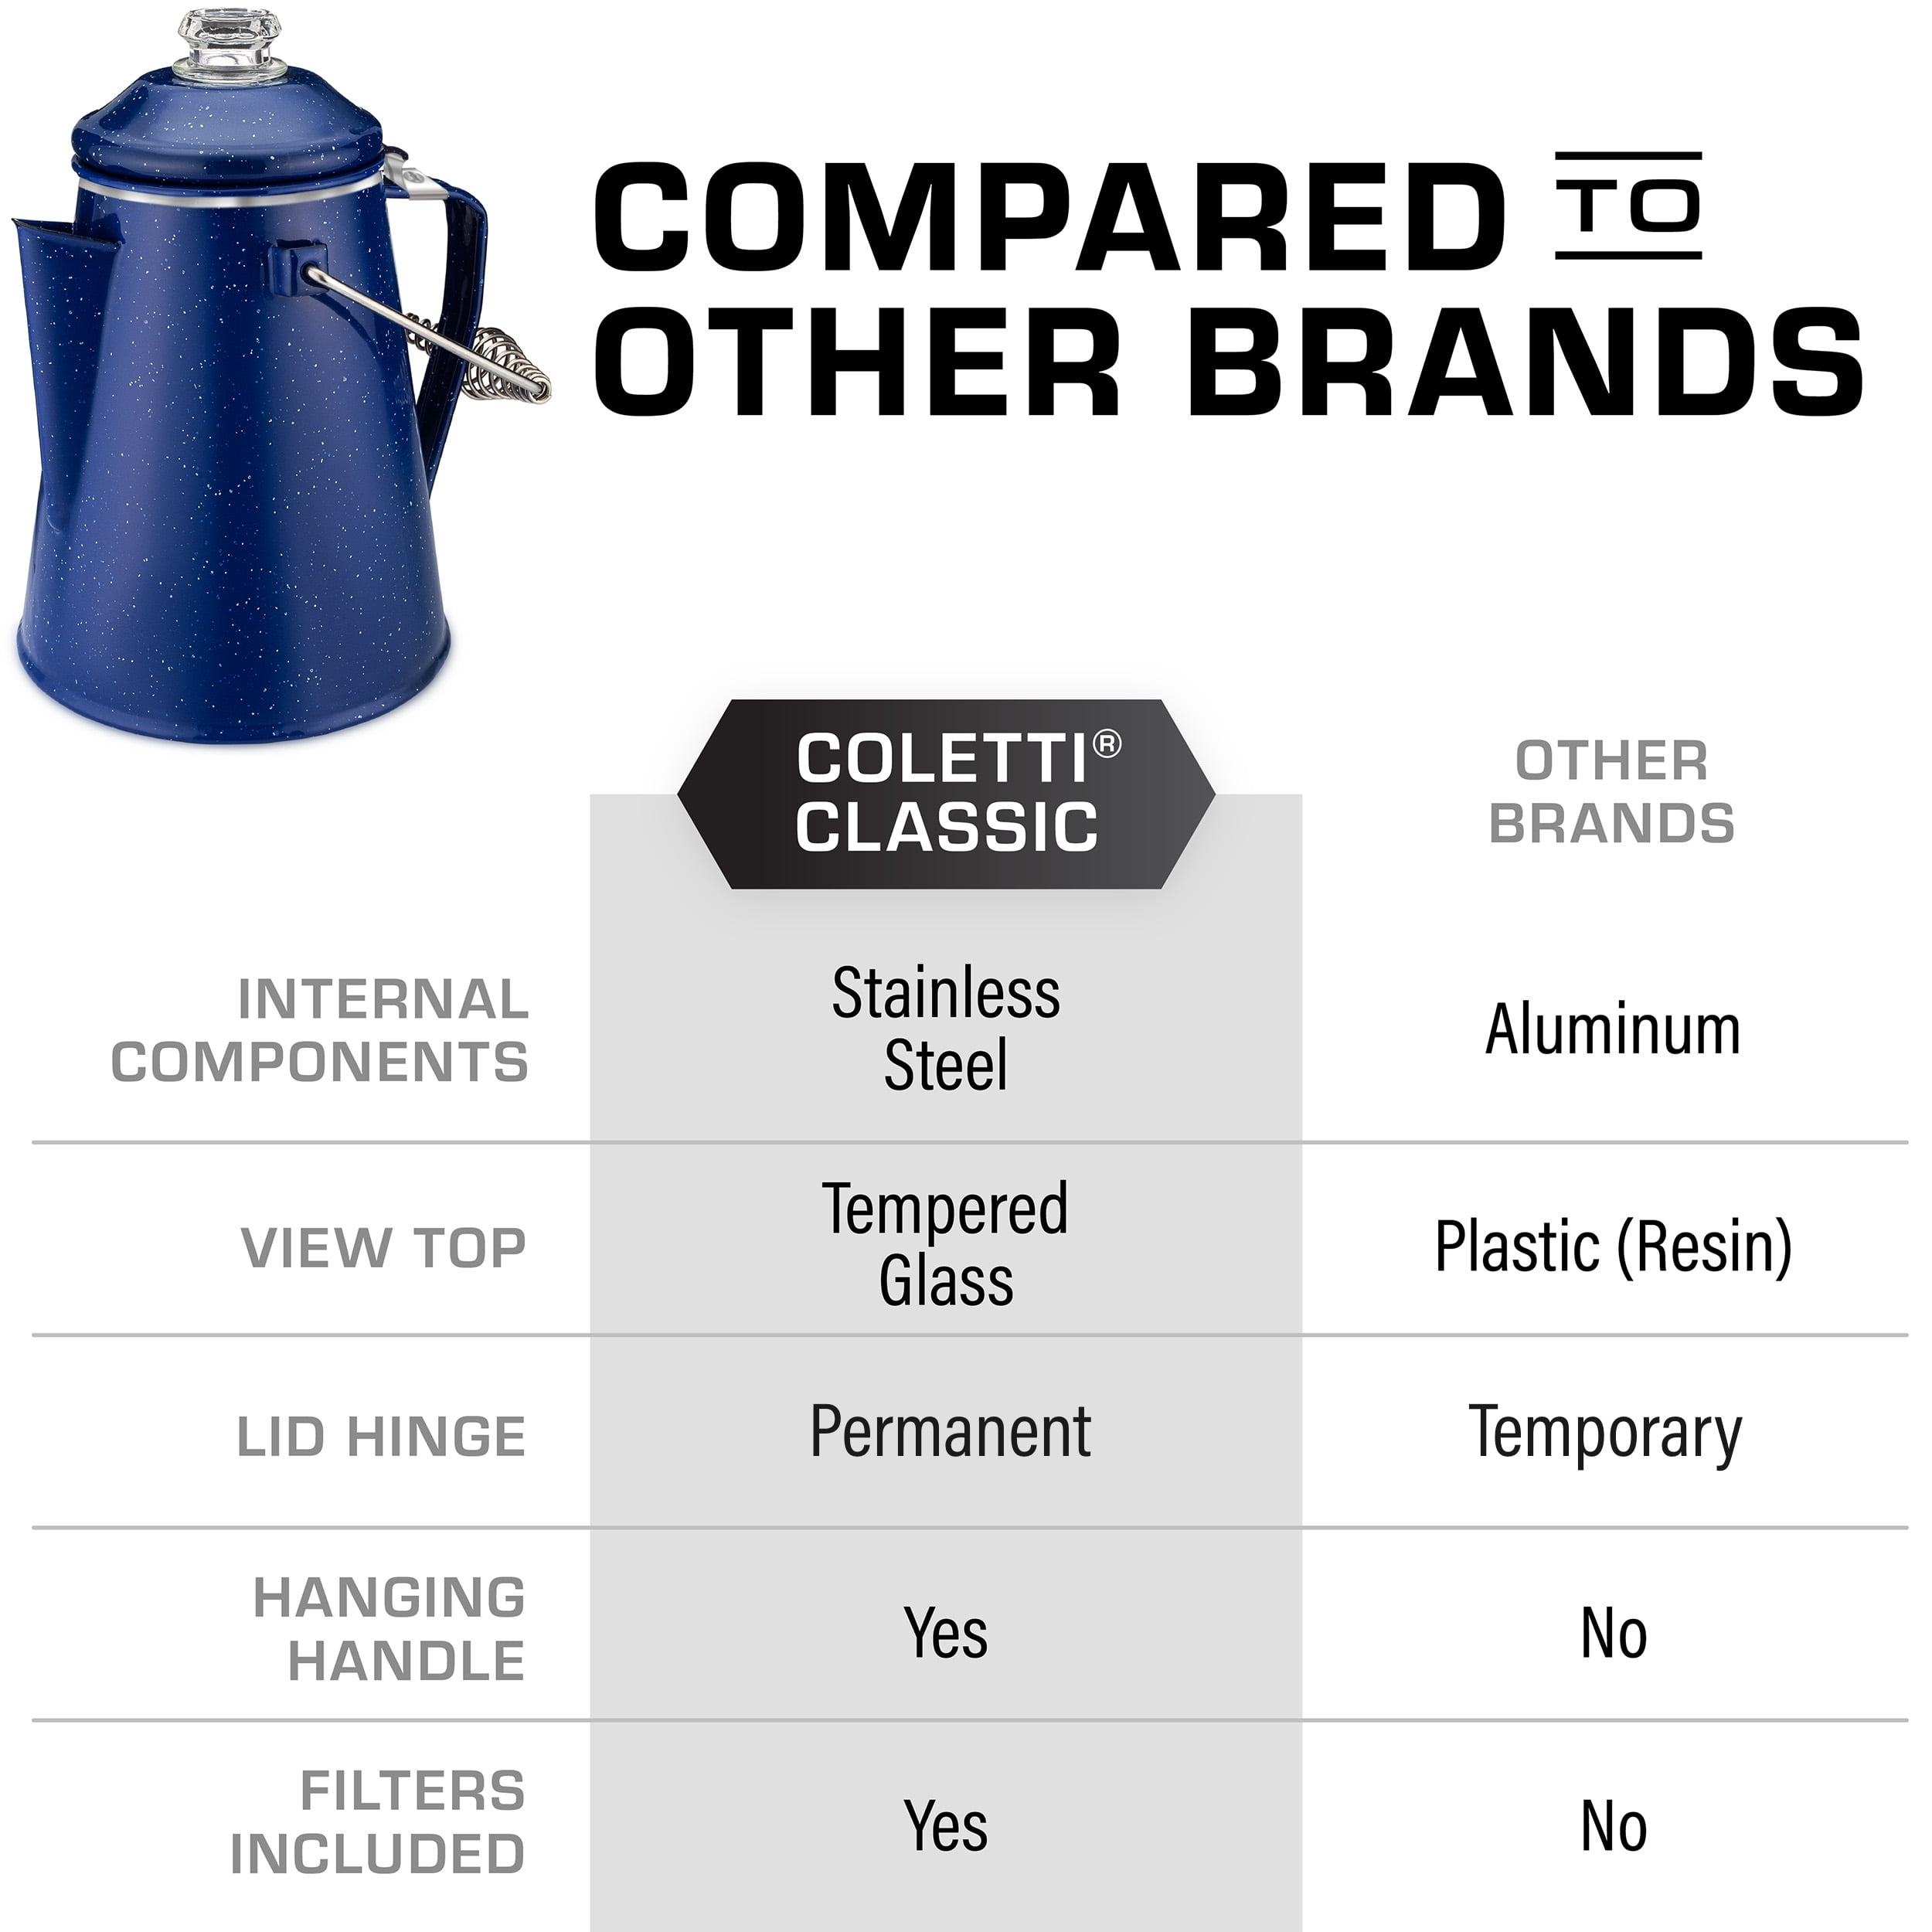 Coletti Classic Camping Coffee Percolator - 12 Cup Enamelware Pot for Campsite, Cabin, Hunting, Fishing, Backpacking, & RV (Black)